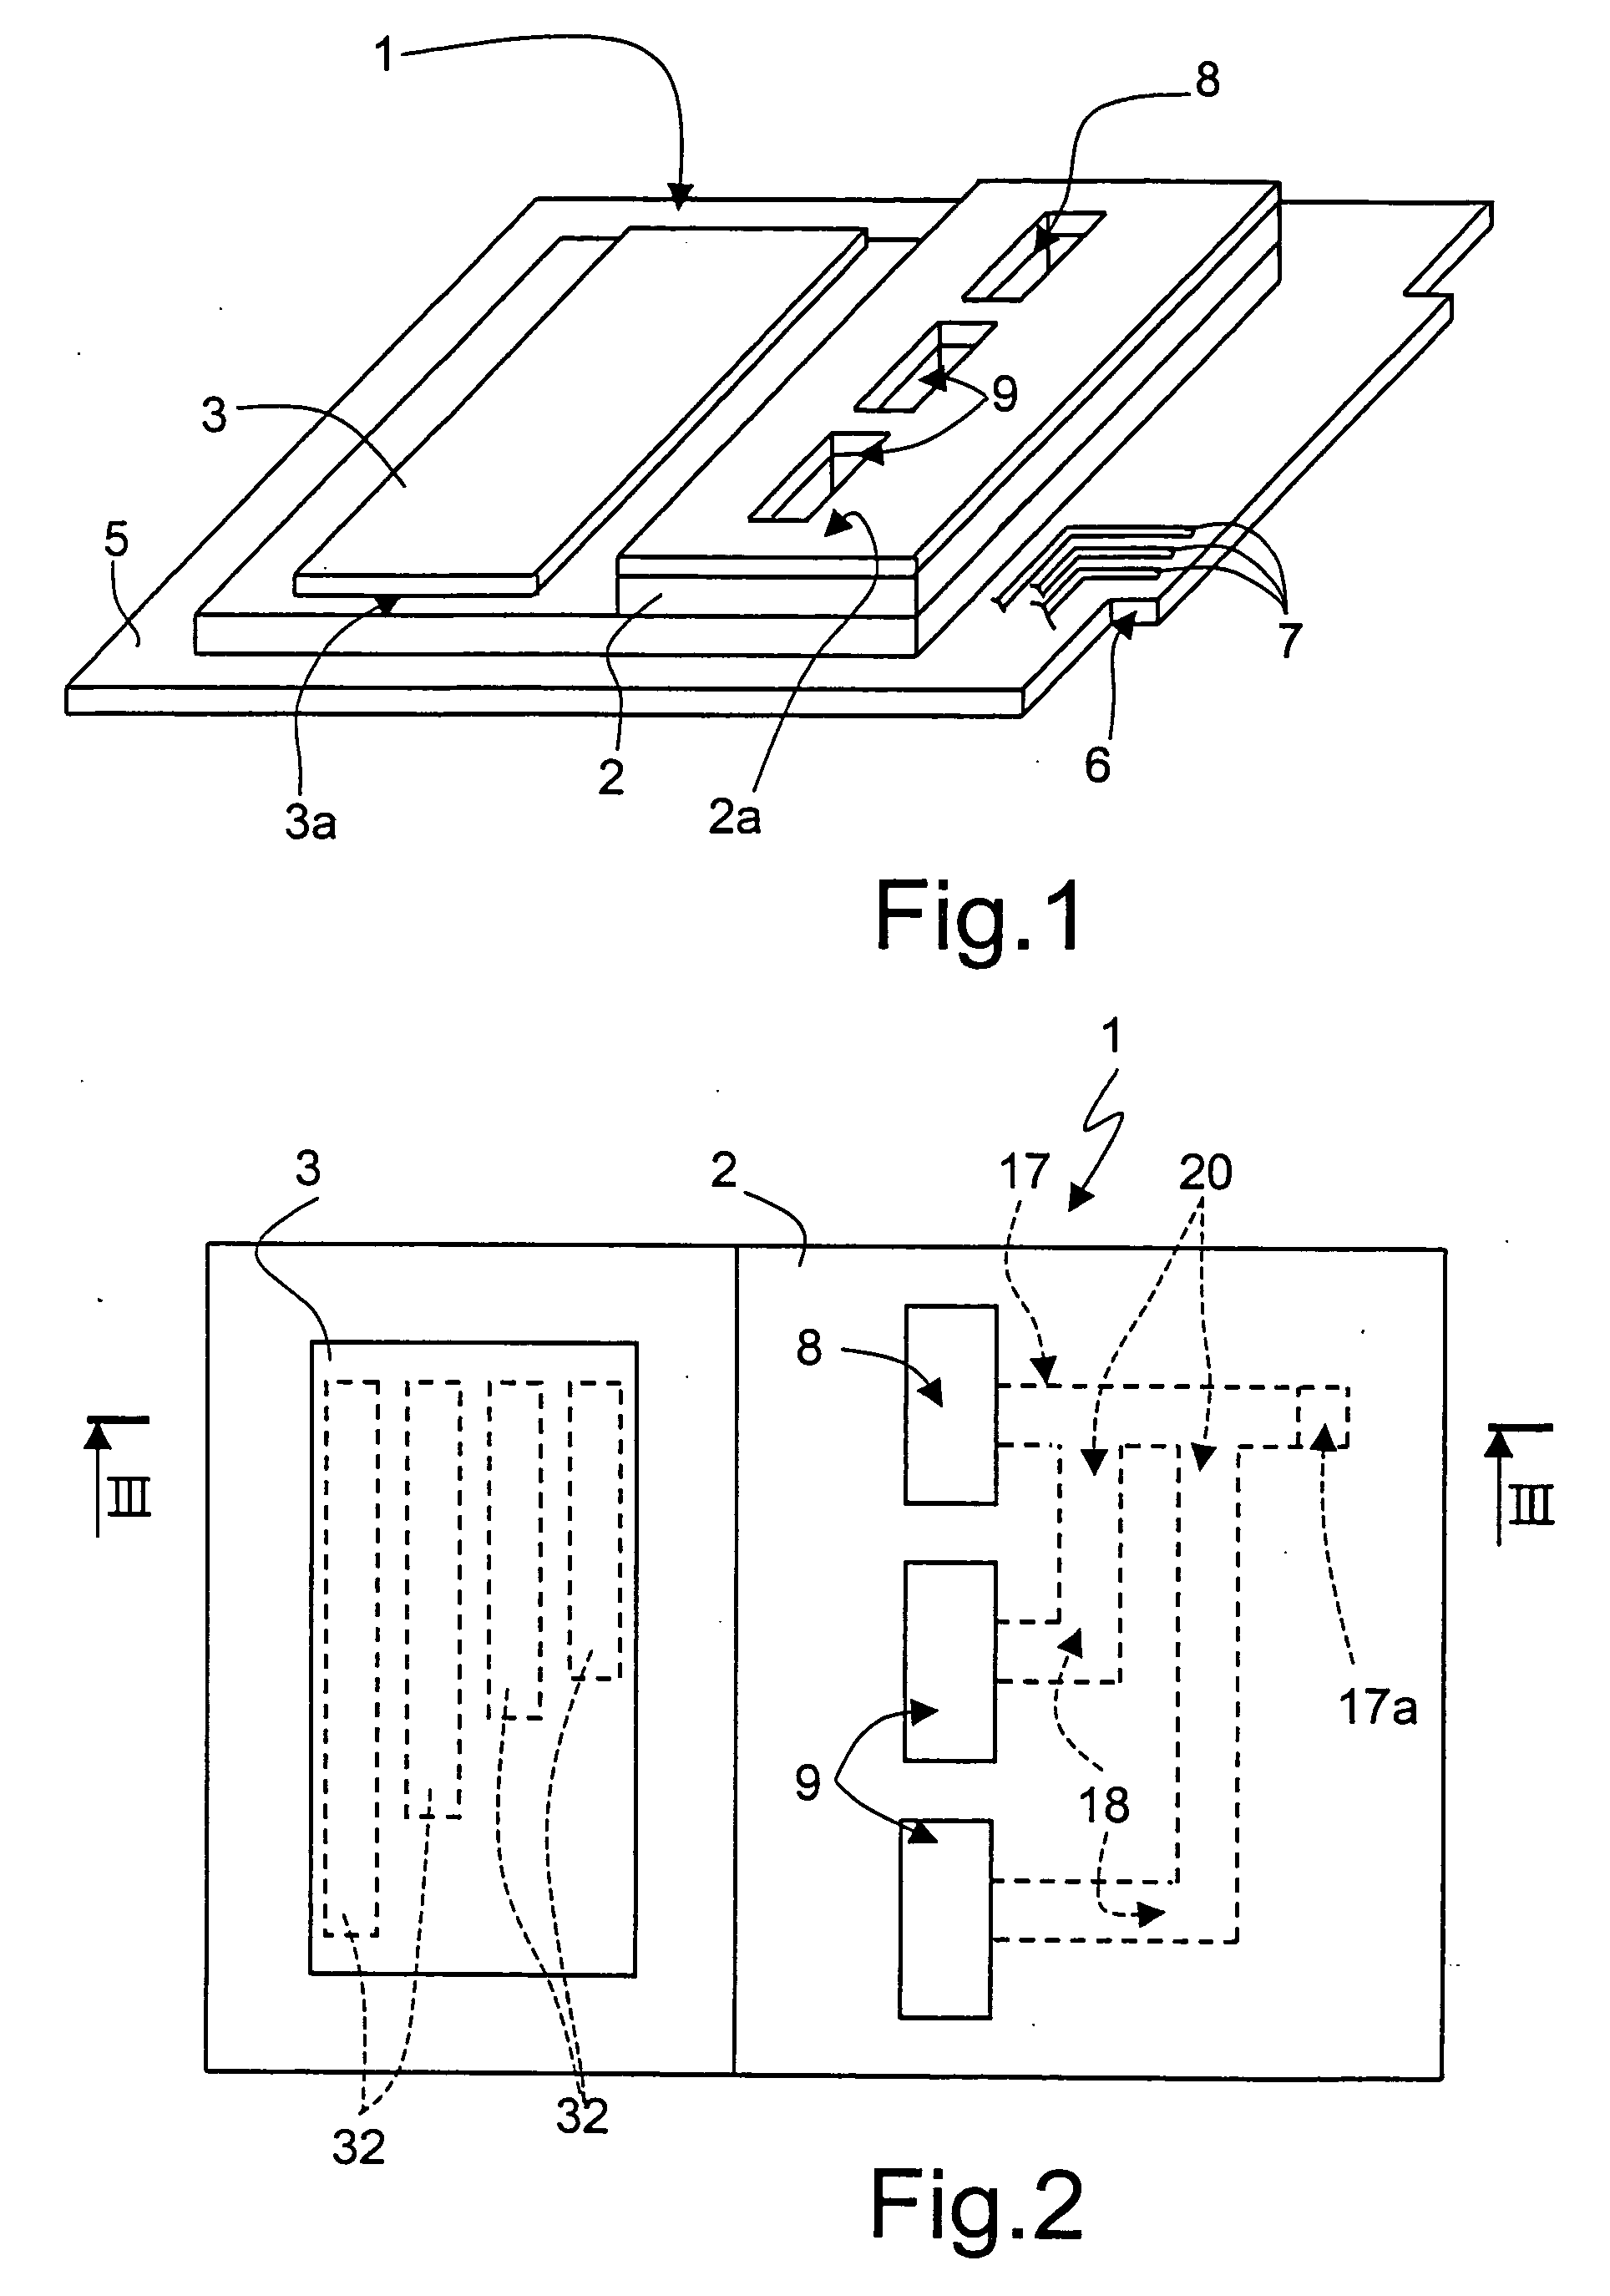 Apparatus for biochemical analysis